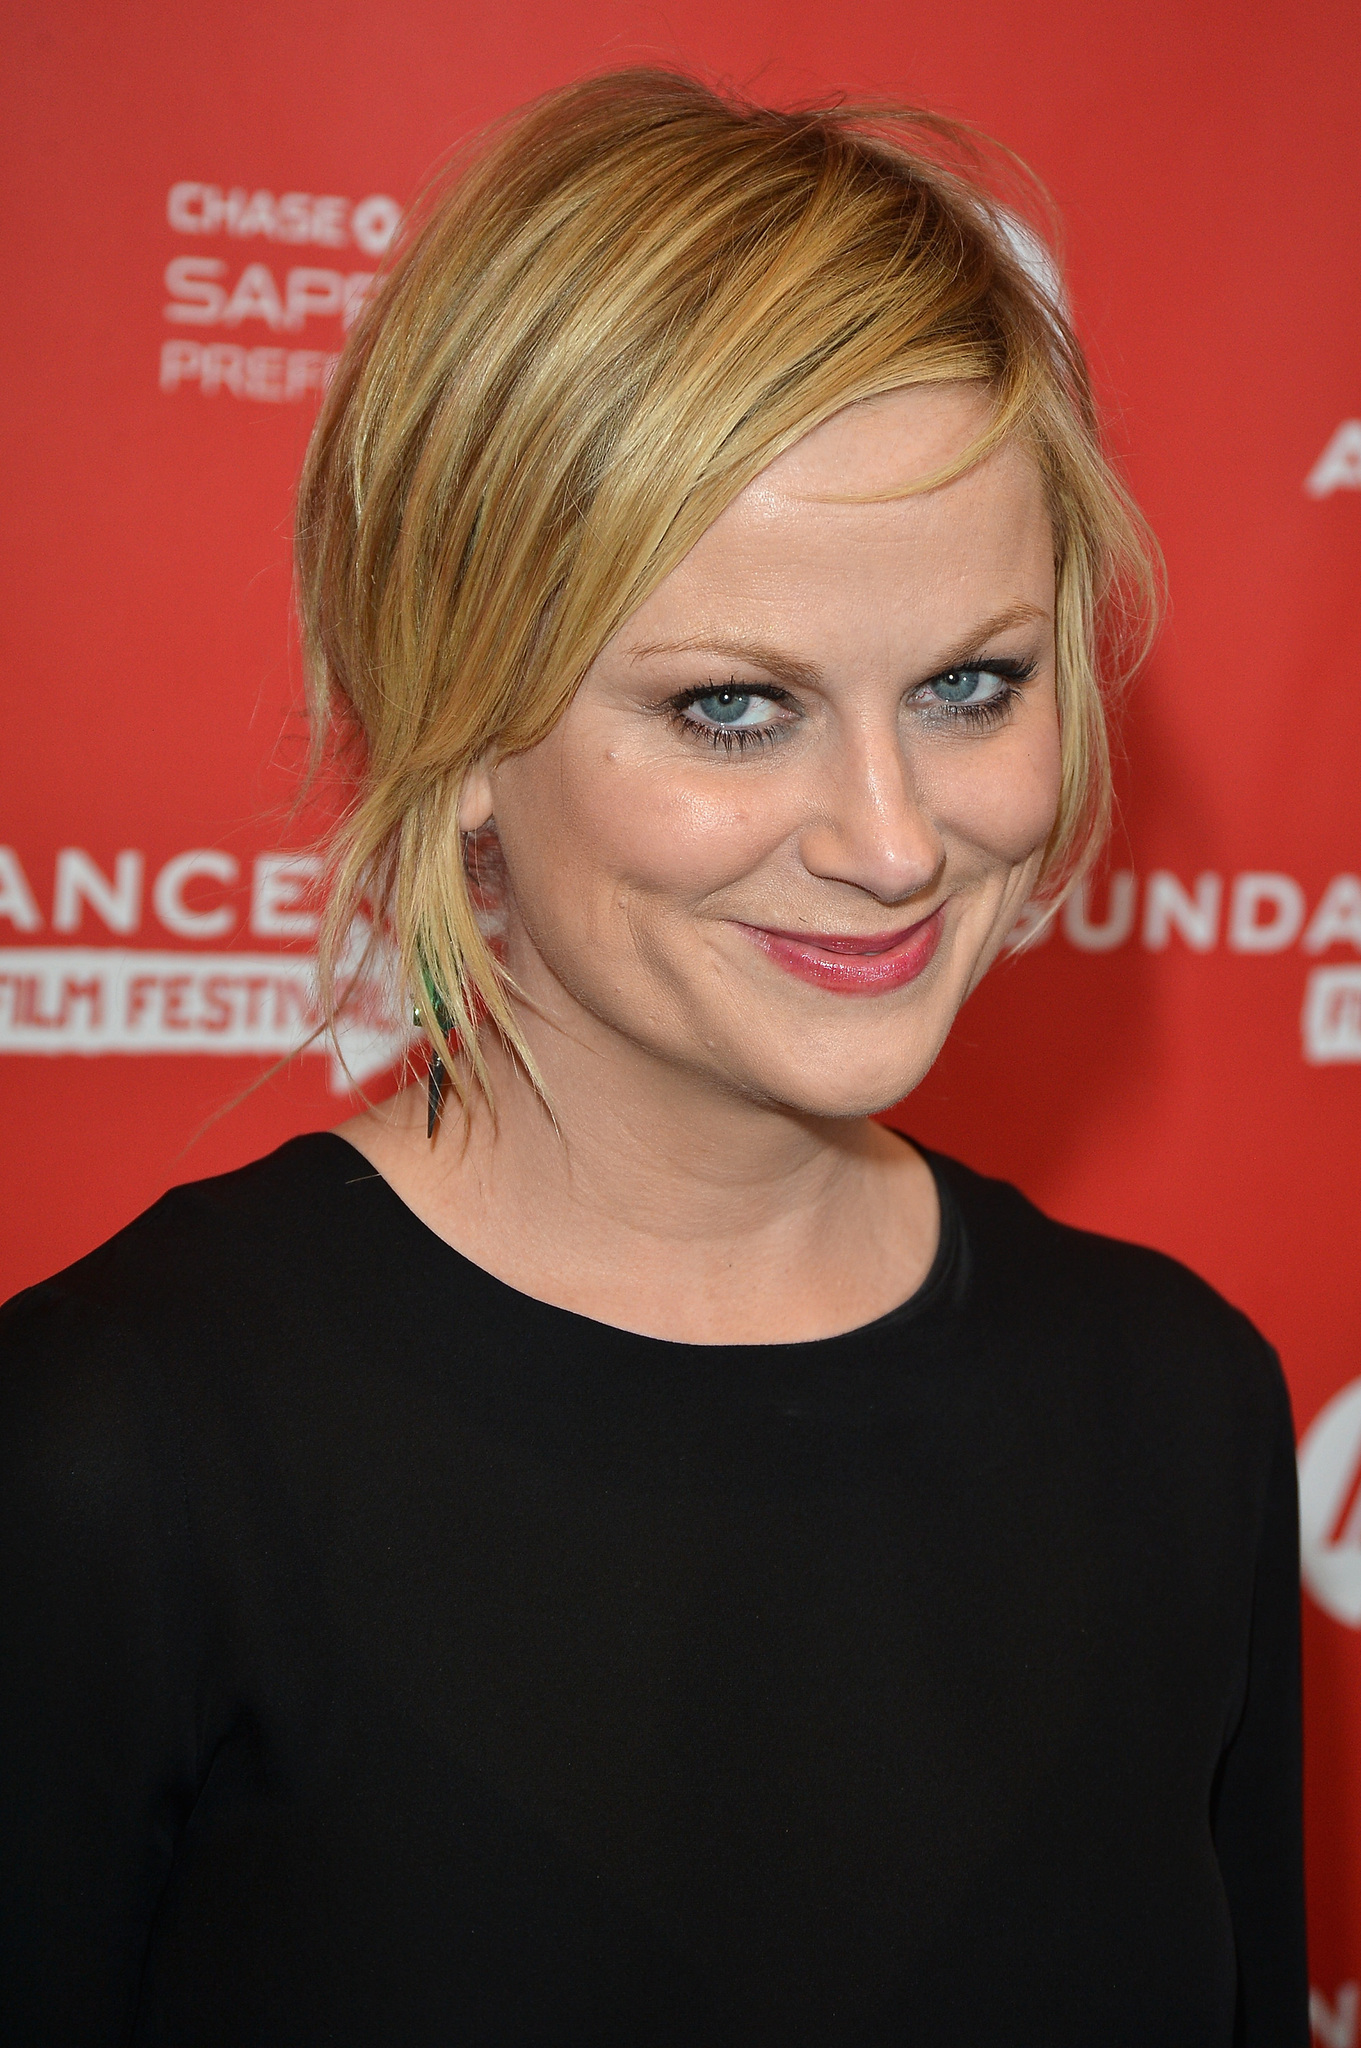 Amy Poehler at event of A.C.O.D. (2013)